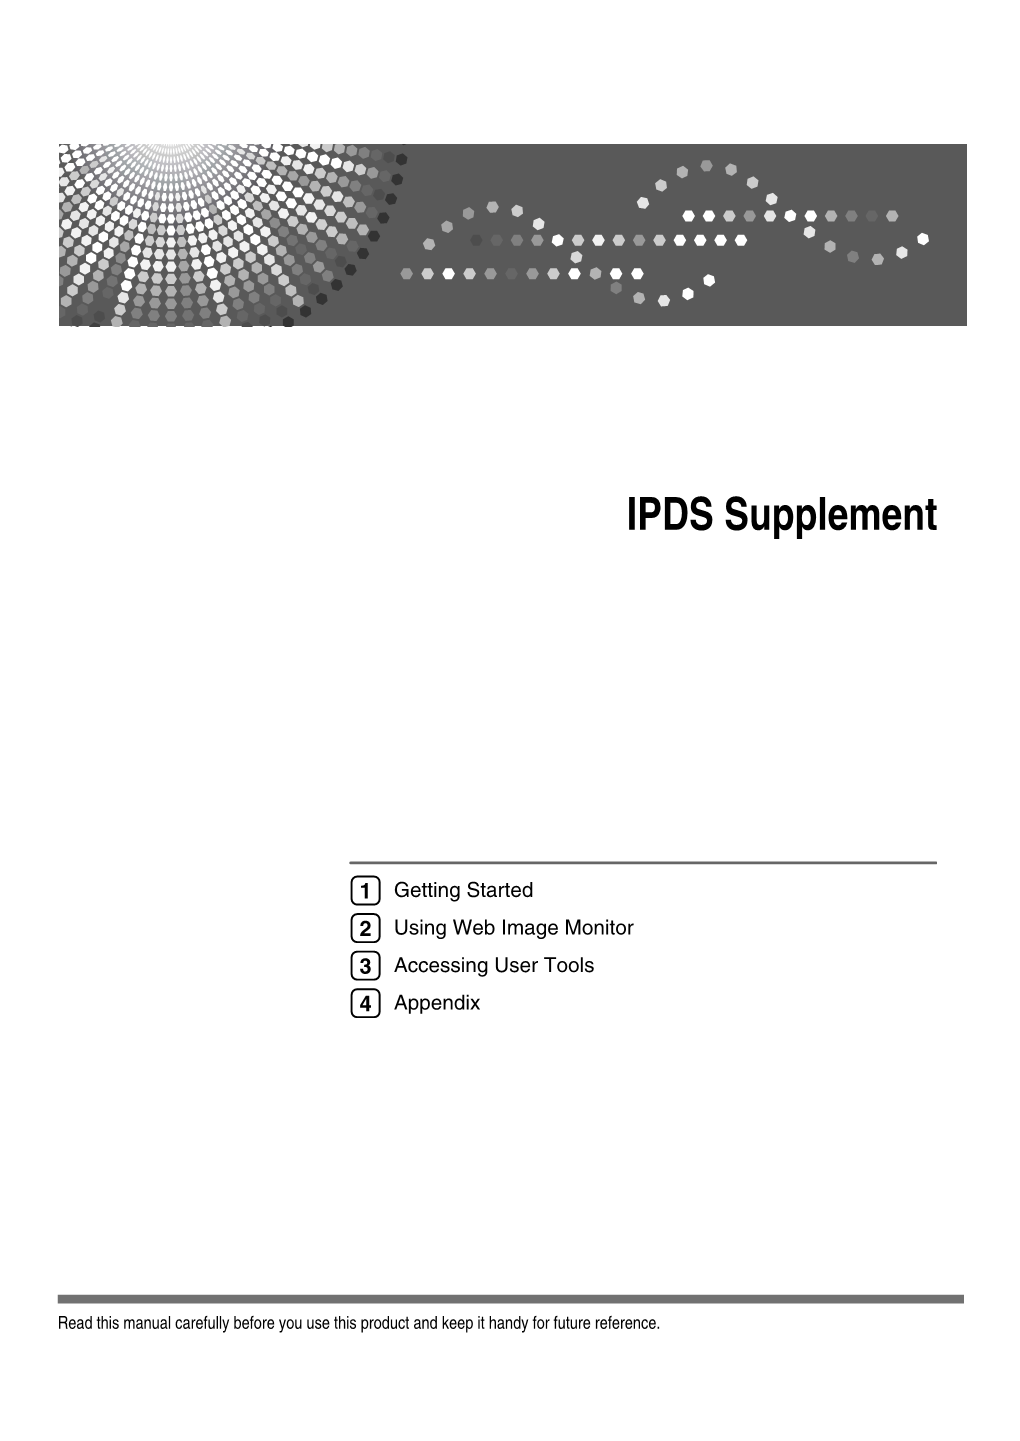 IPDS Supplement